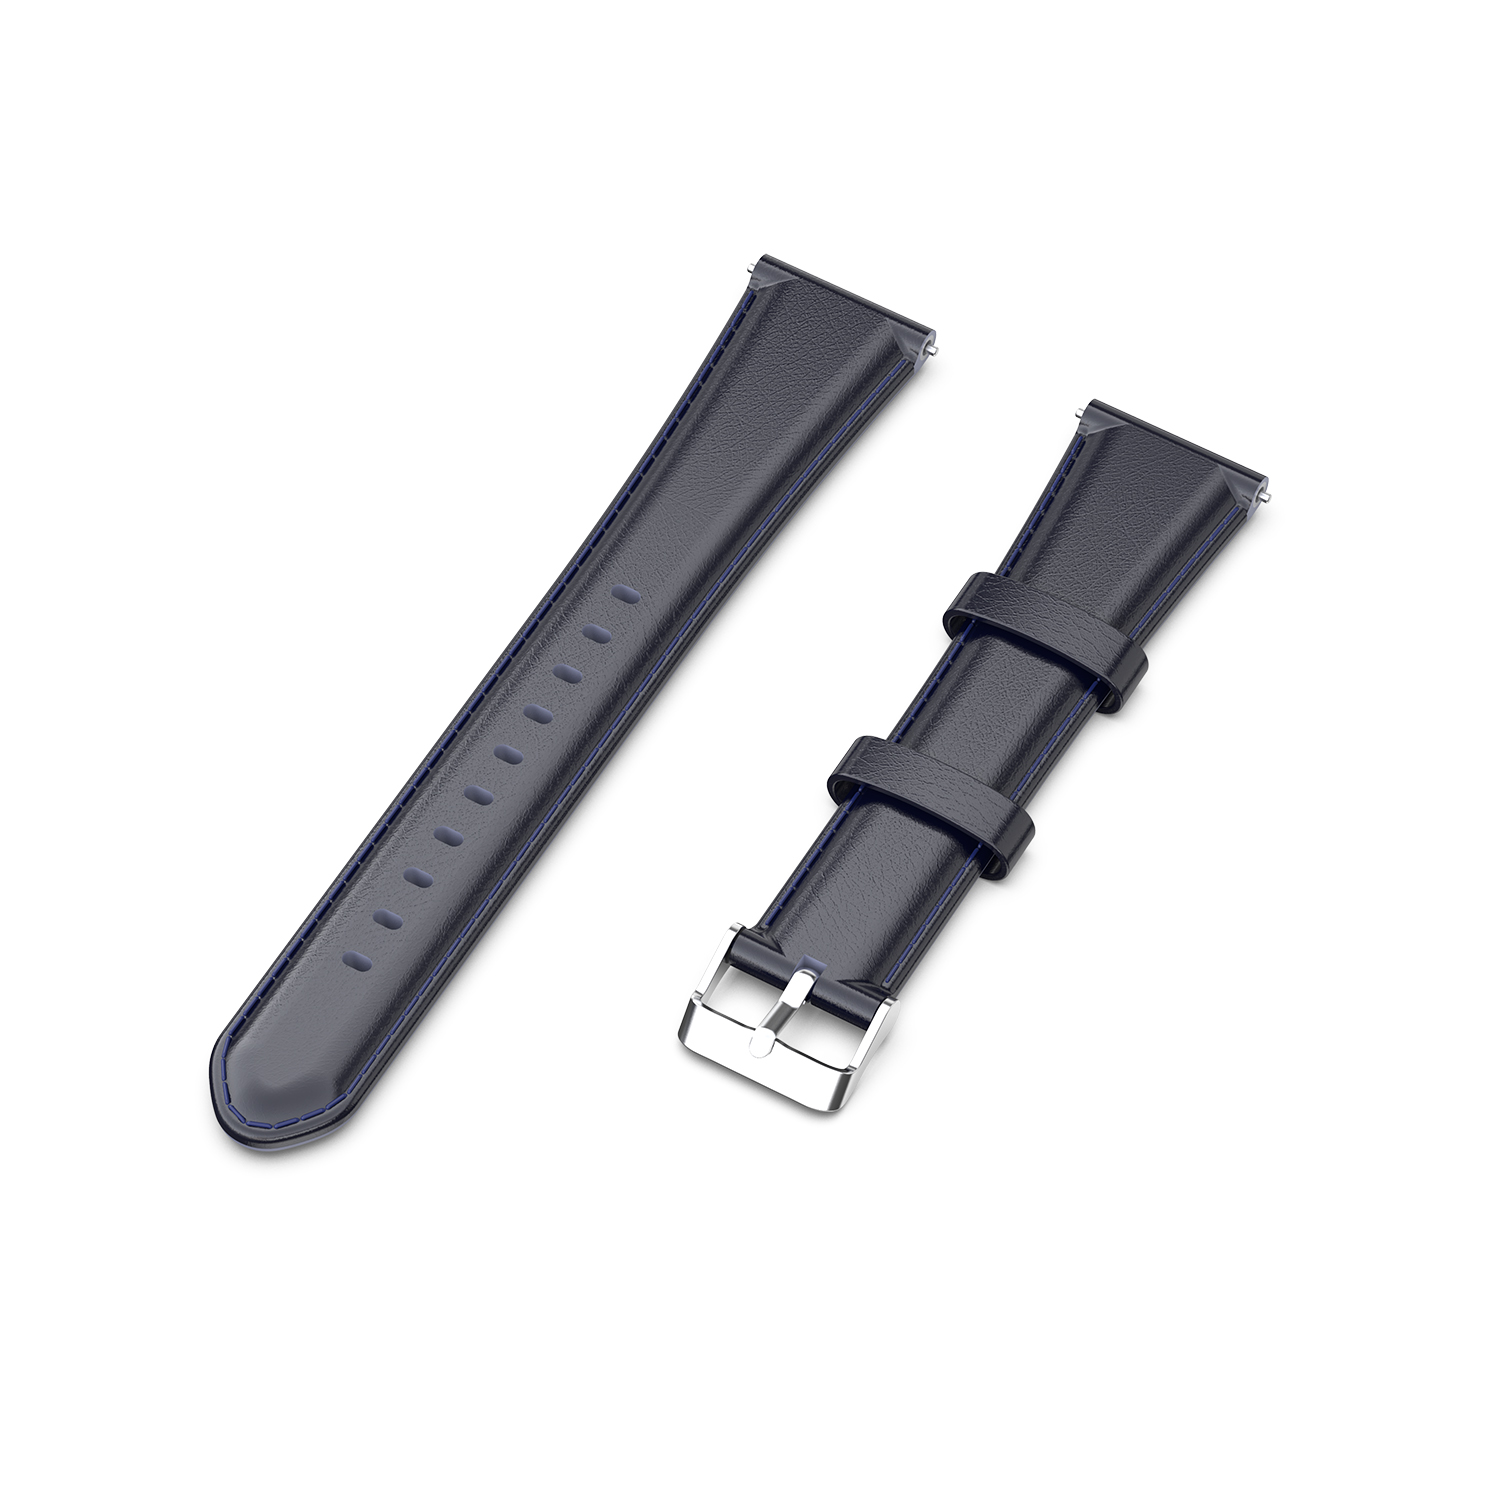 Bakeey-22mm-Genuine-Leather-Replacement-Strap-Smart-Watch-Band-For-Amazfit-GTR-47MM-1786519-12